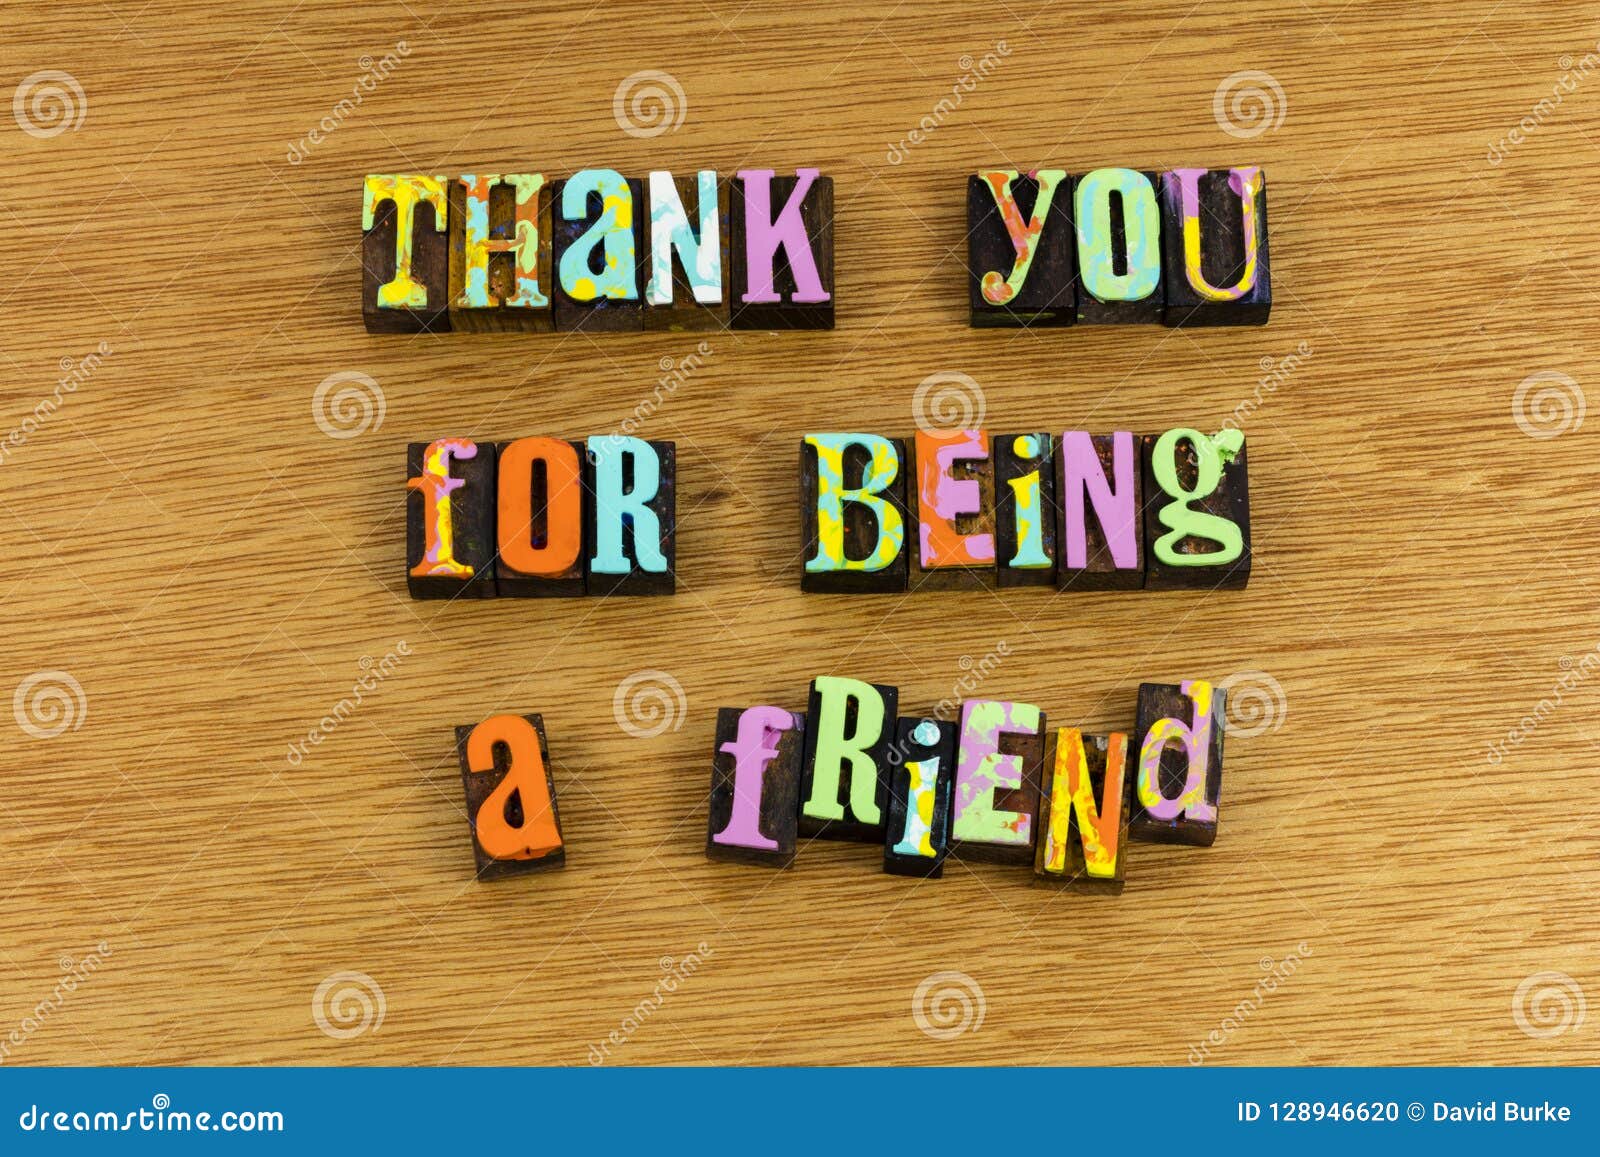 Thank You for Being My Friend Bff Stock Photo - Image of words, message